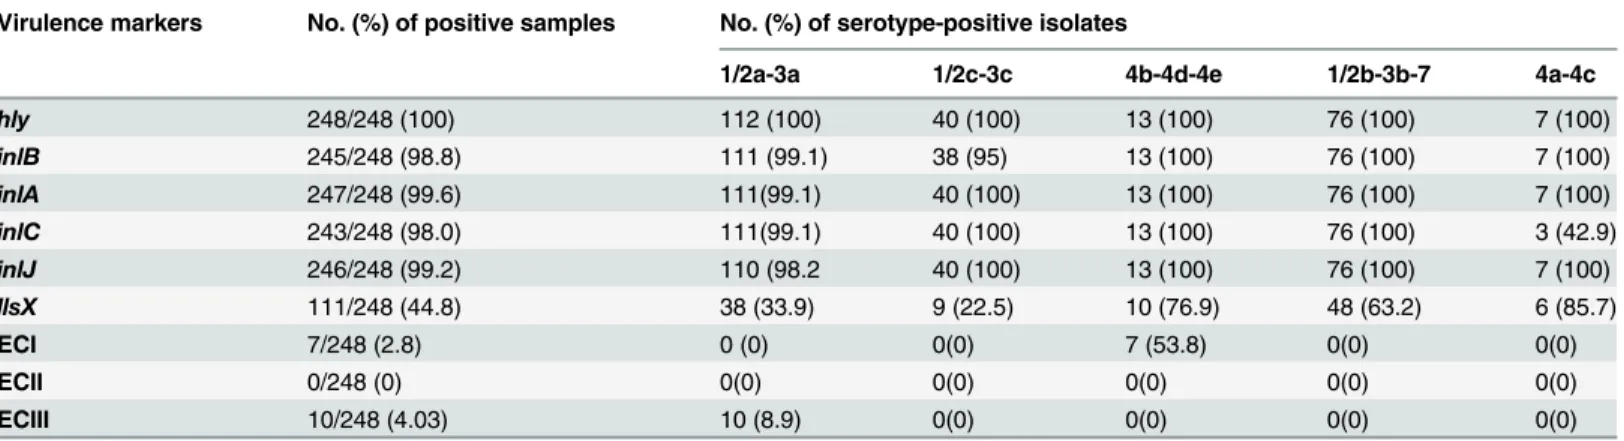 Table 5. Virulence markers of 248 Listeria monocytogenes strains in positive samples.